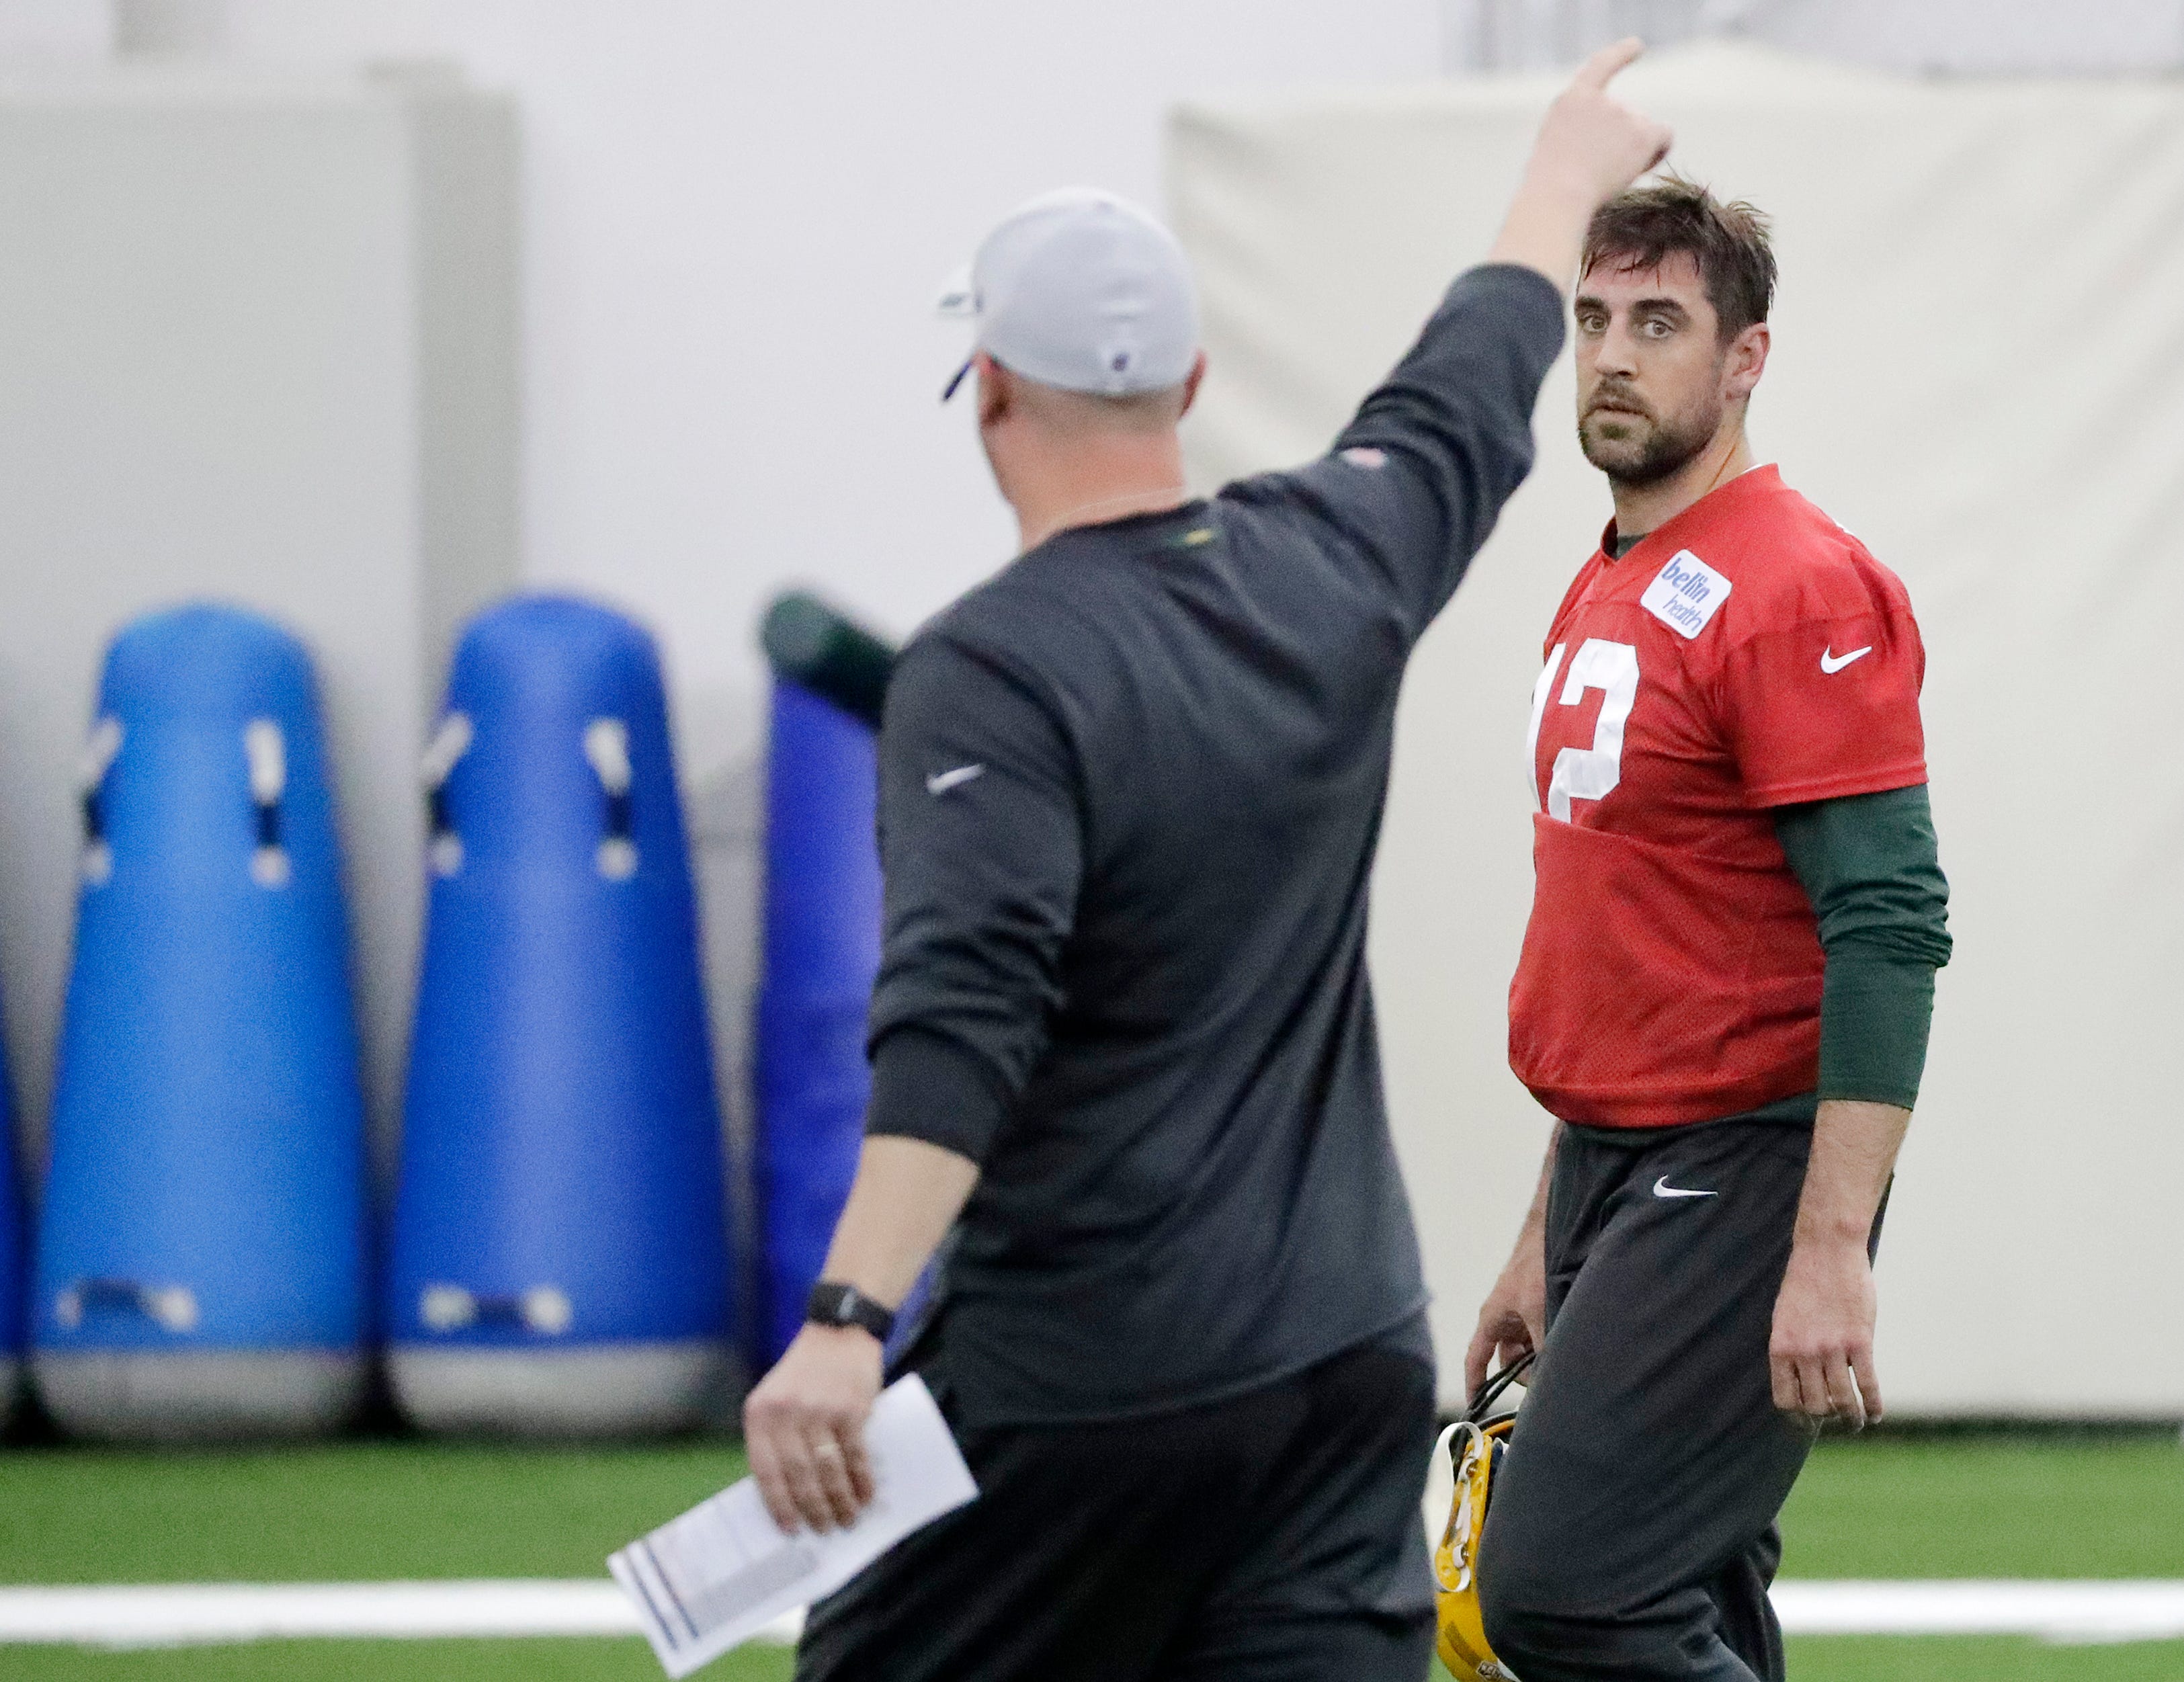 Green Bay Packers quarterback Aaron Rodgers (12) during a team practice at the Don Hutson Center on Wednesday, April 24, 2019 in Ashwaubenon, Wis.